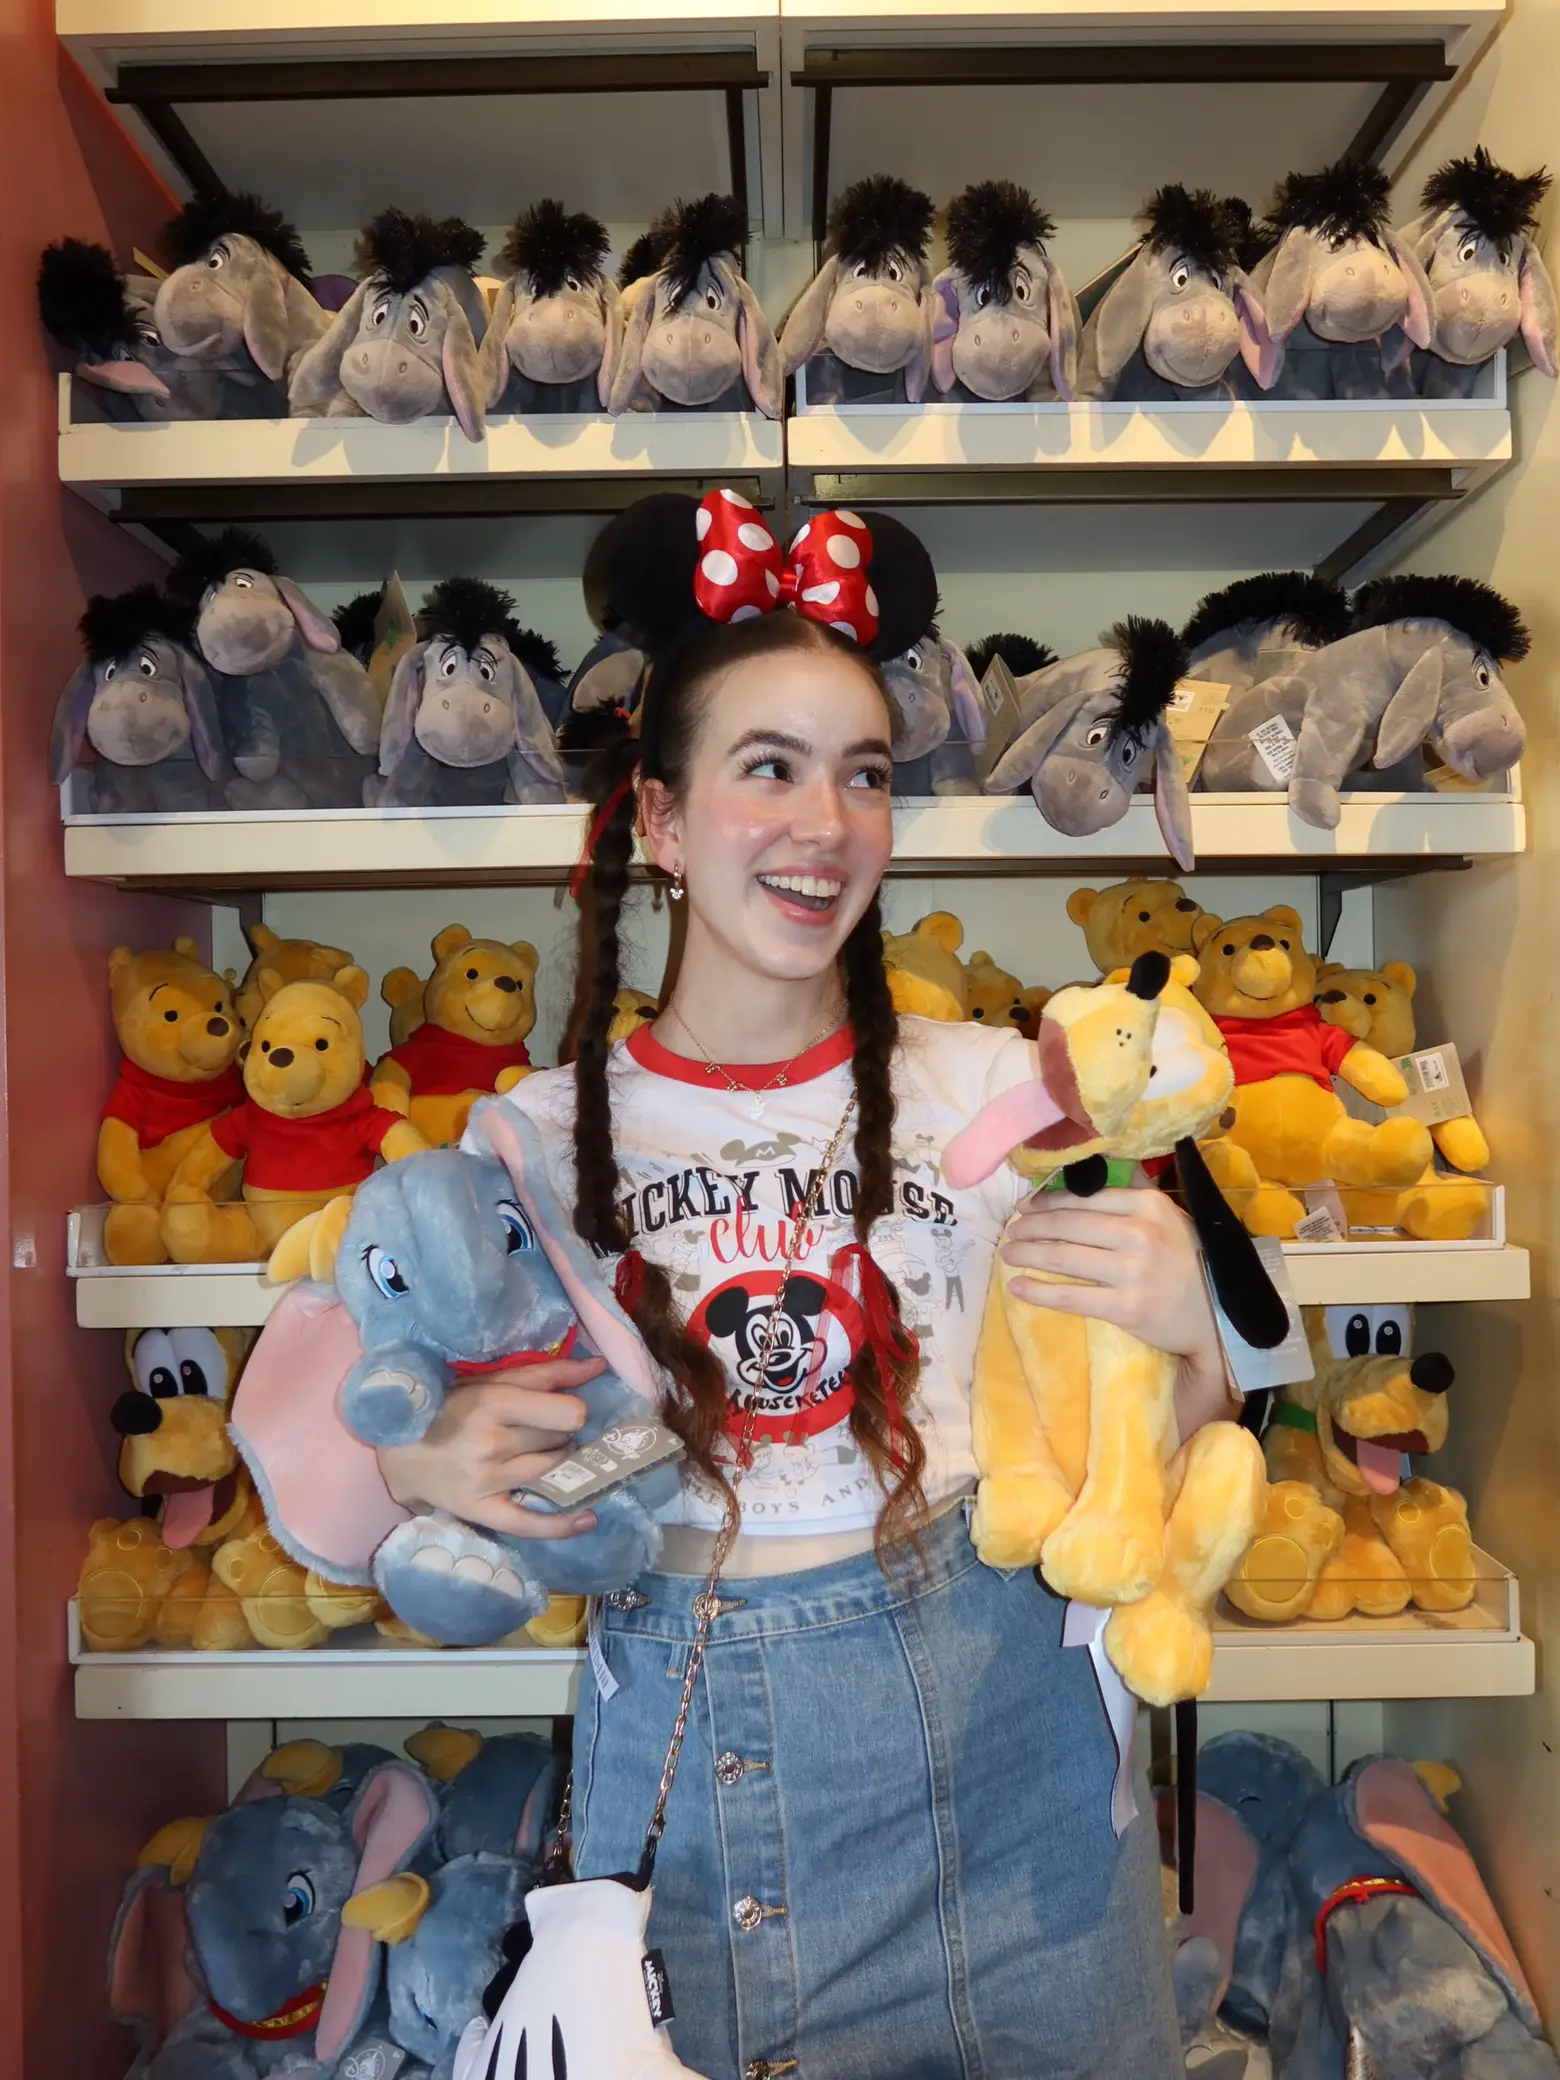  A woman wearing a blue shirt and jeans is standing in front of a display of stuffed animals. She is holding a frisbee and appears to be enjoying her time with the toys.